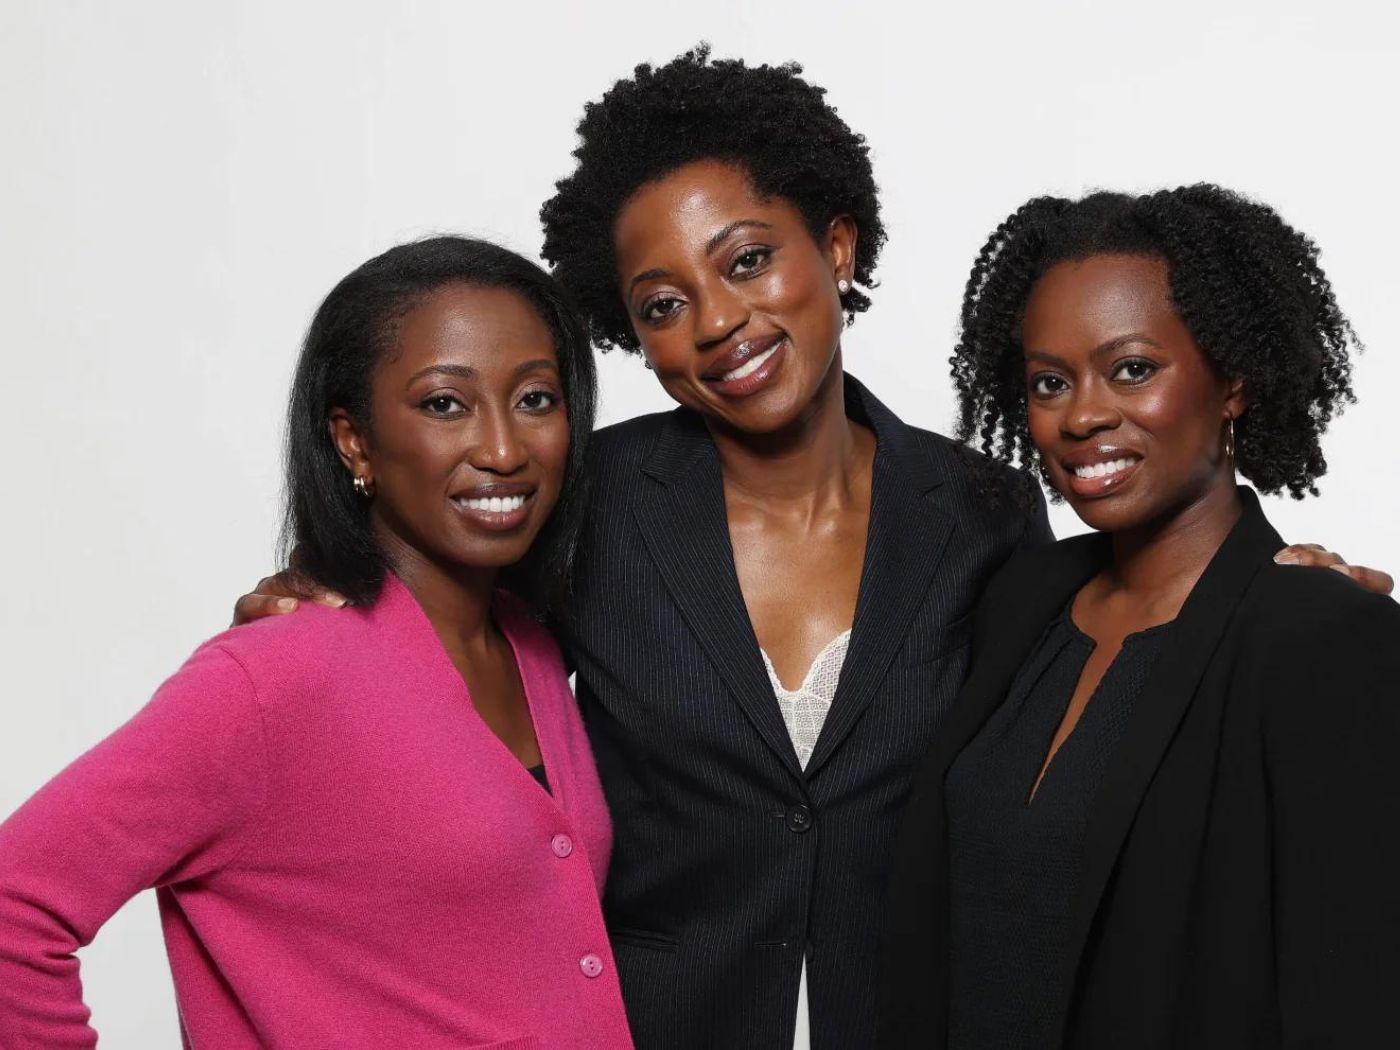 Three women stand together, smiling.